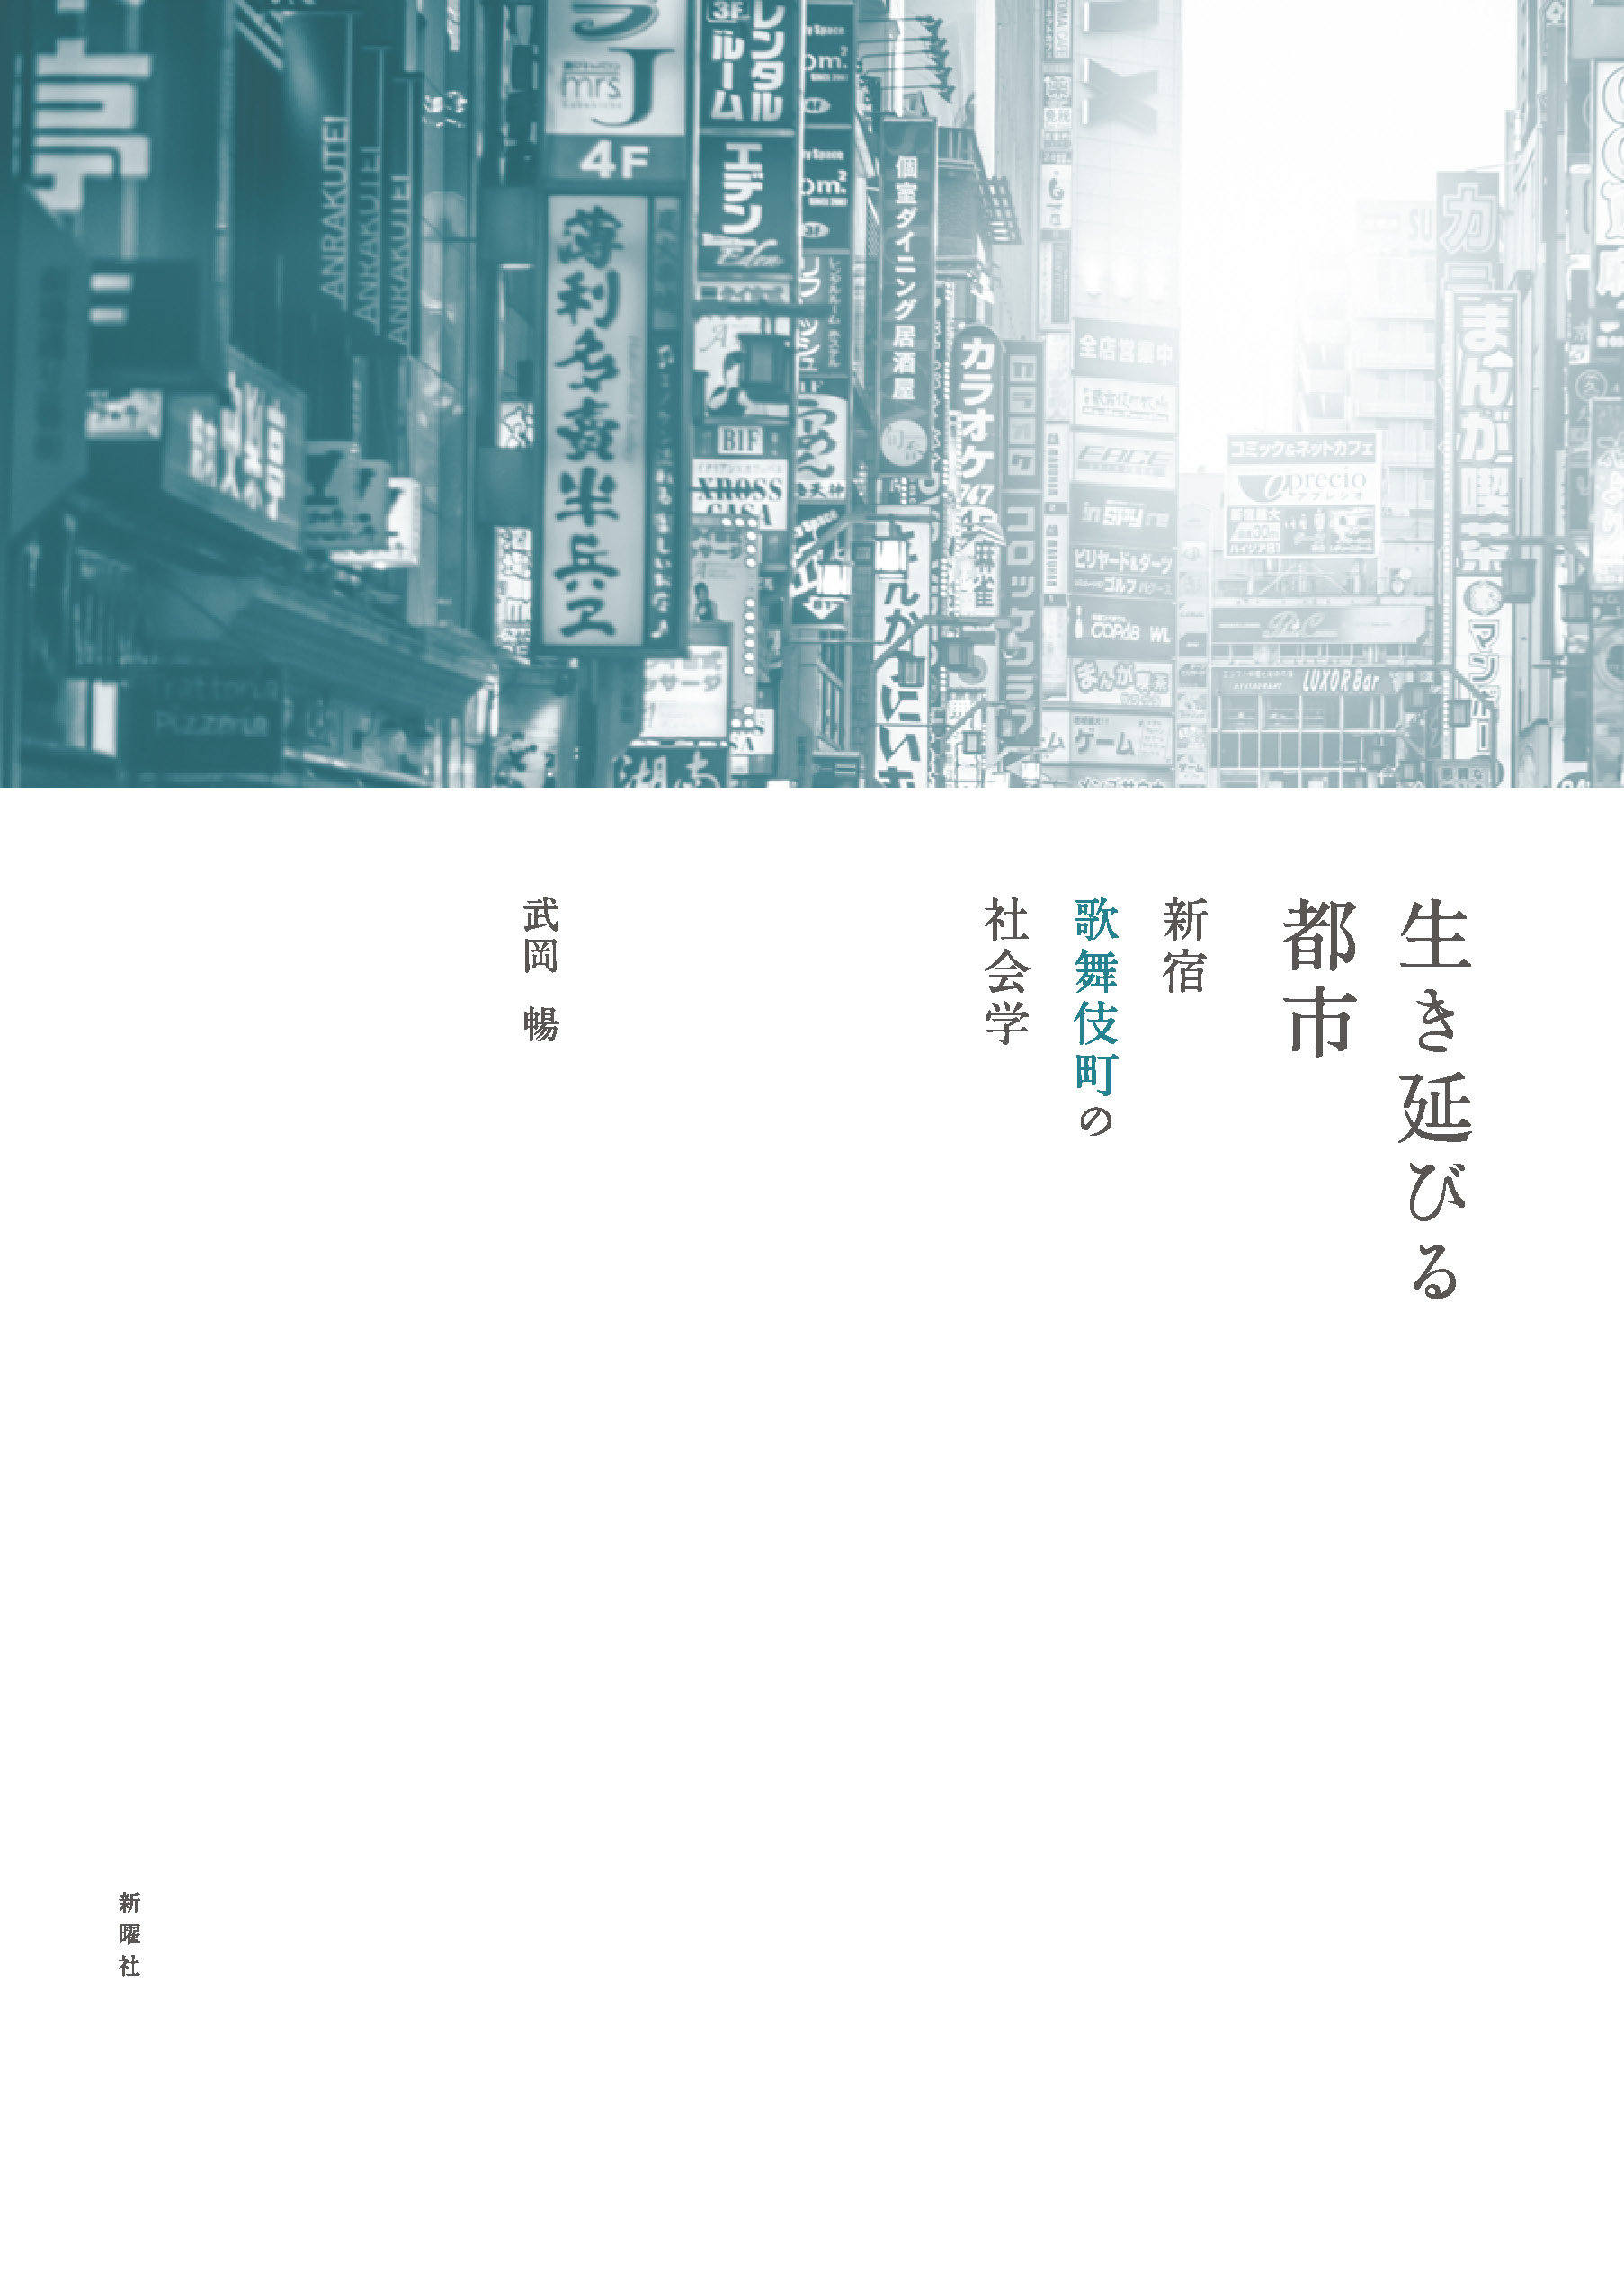 greenish b+w picture of Shinjuku on a cover